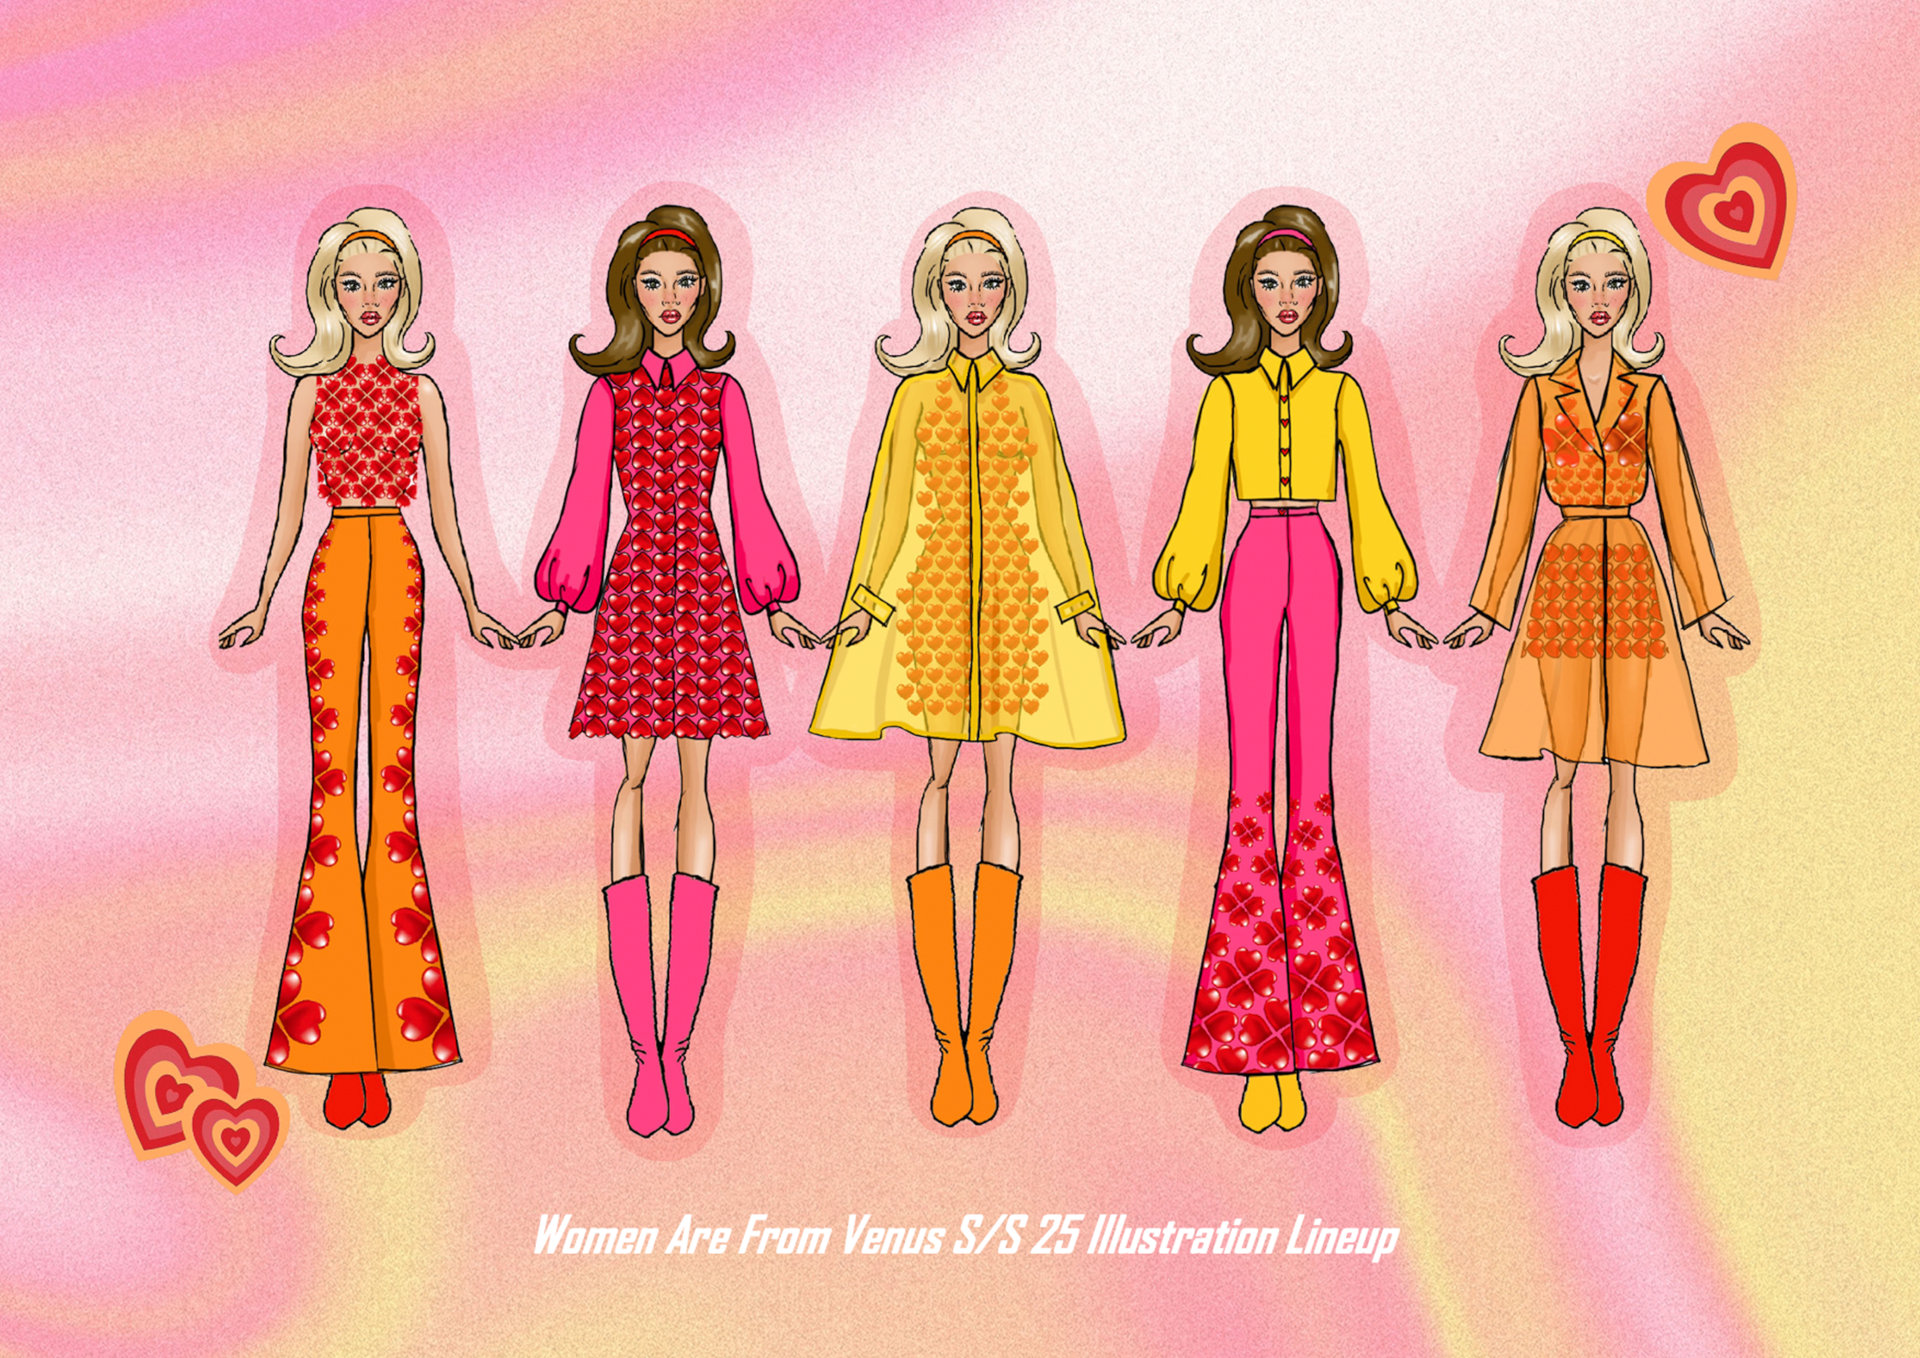 Illustrations of five women in 1960s-style outfits